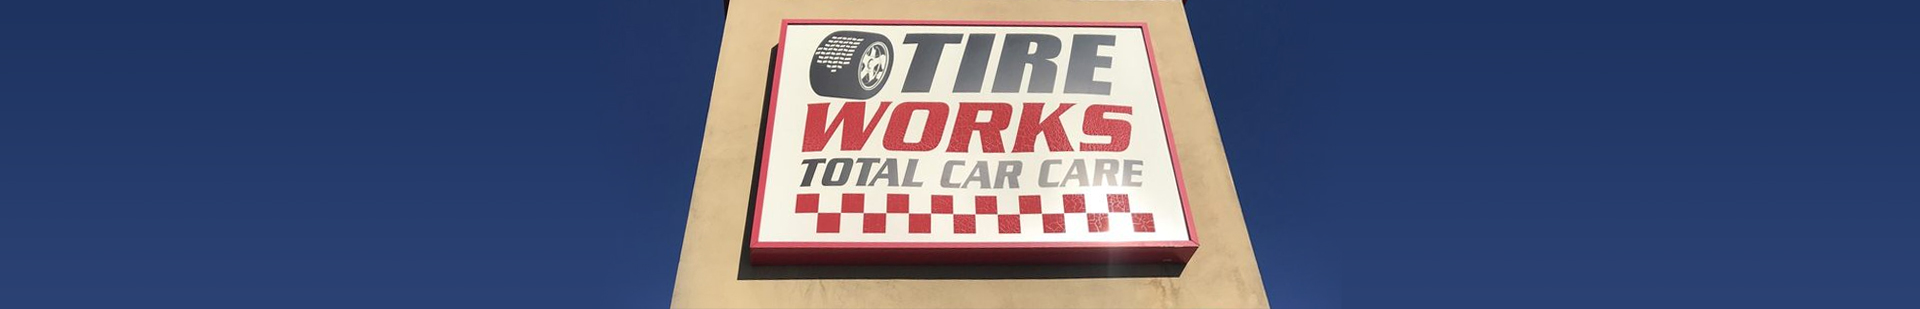 Tire Works Total Car Care Sign